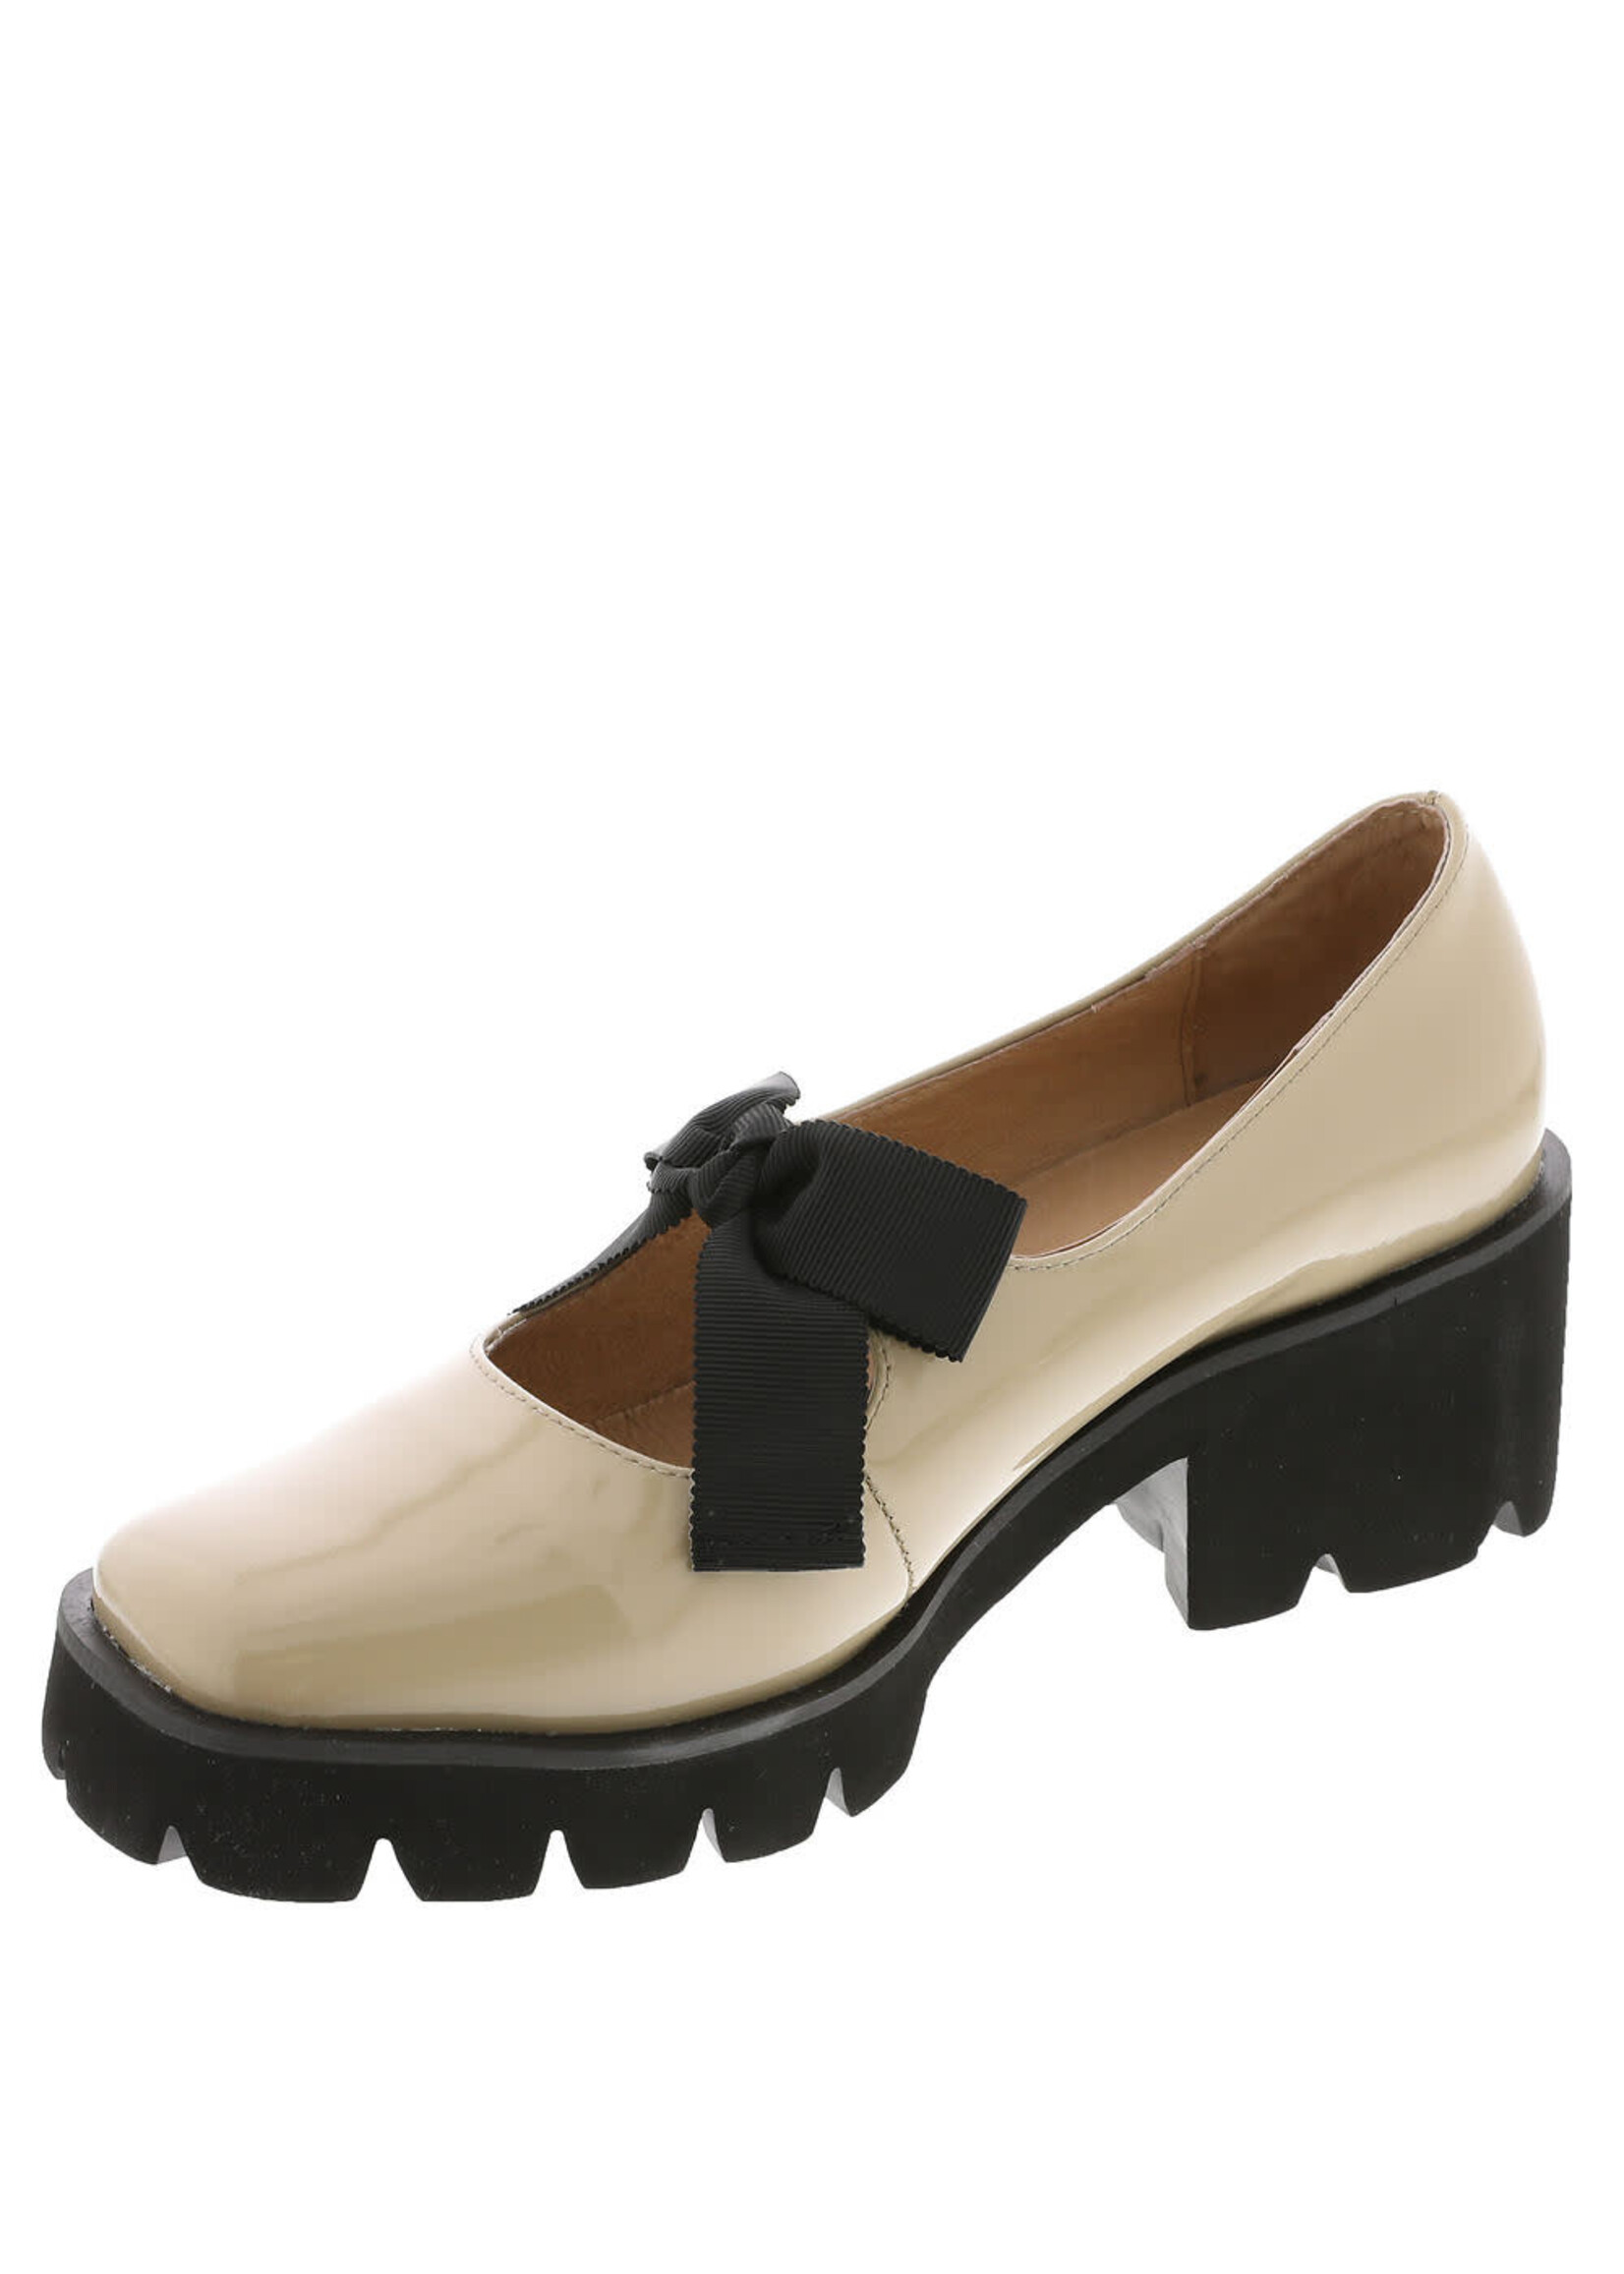 ALL BLACK Tap and Lug in Beige Patent Leather by ALL BLACK  Footwear  25% Off